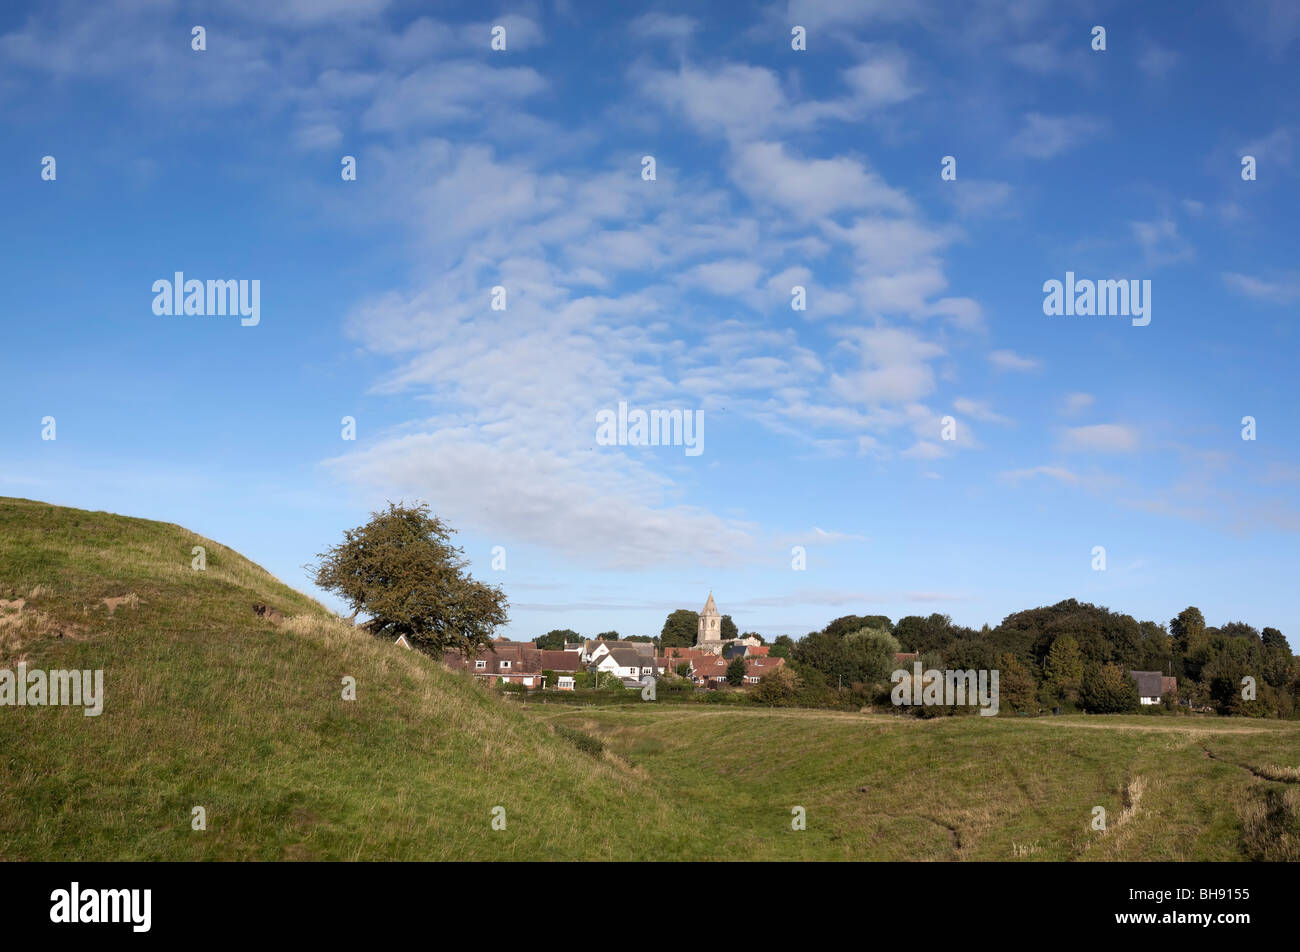 motte and bailey castle yelden bedfordshire home counties england uk europe Stock Photo